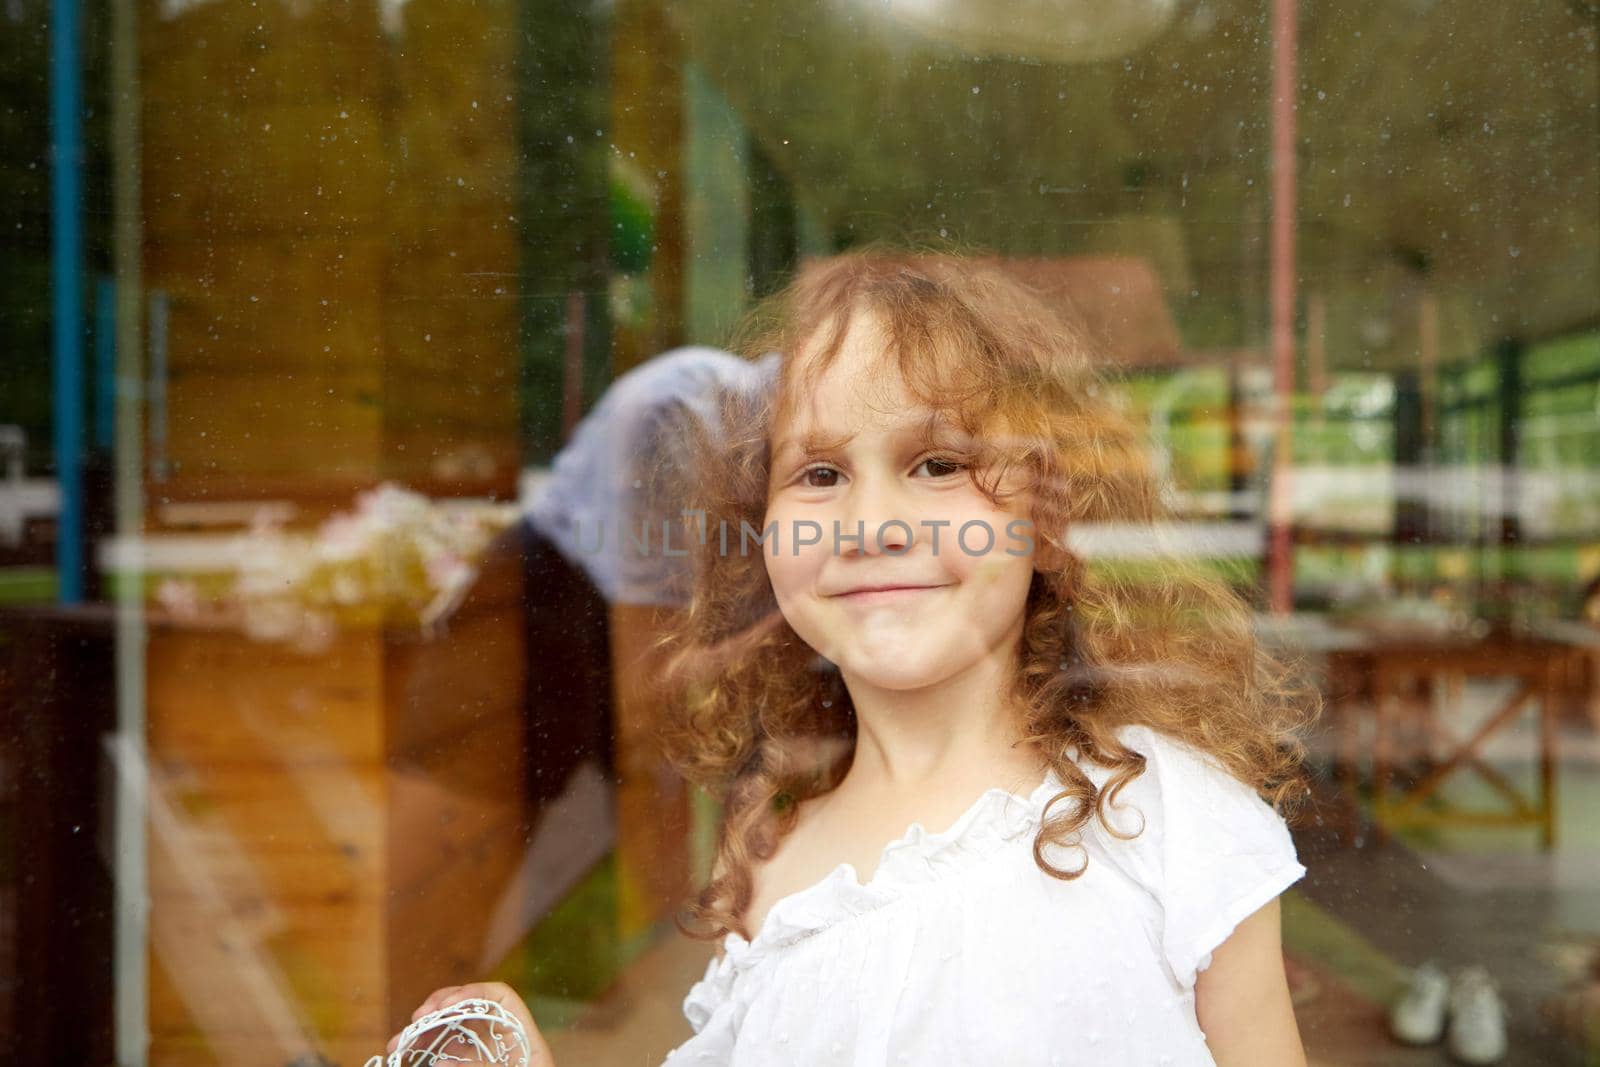 Cute happy girl with curly hair smiling and looking at camera while standing behind transparent glass